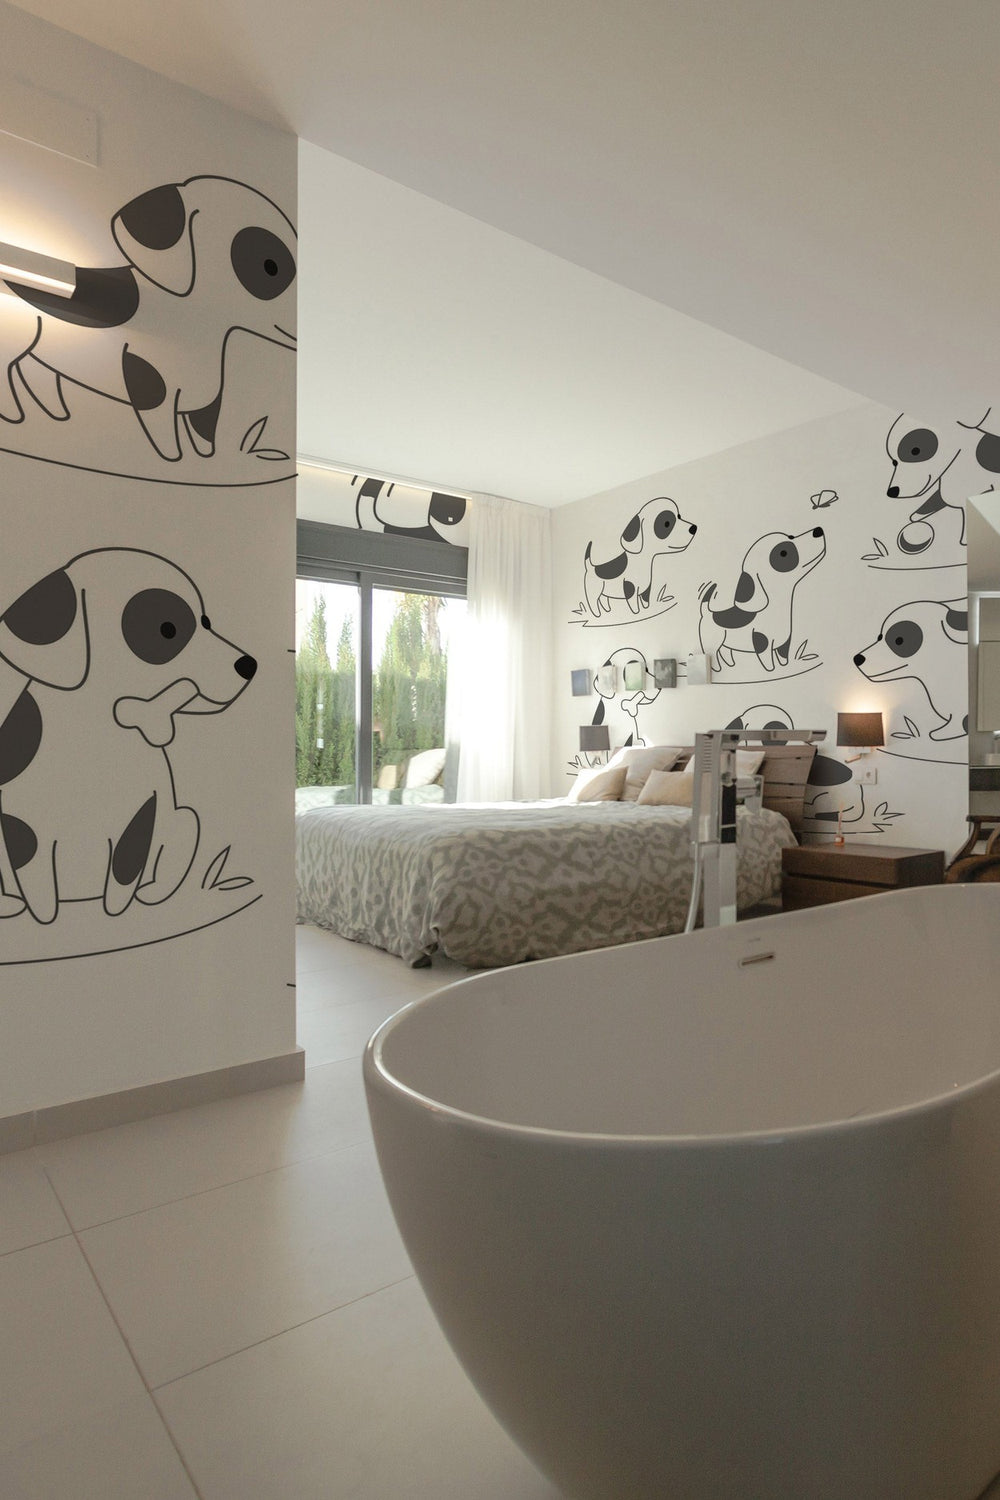 A spacious modern bedroom with a large dog-themed wall mural and a white freestanding bathtub in the foreground.